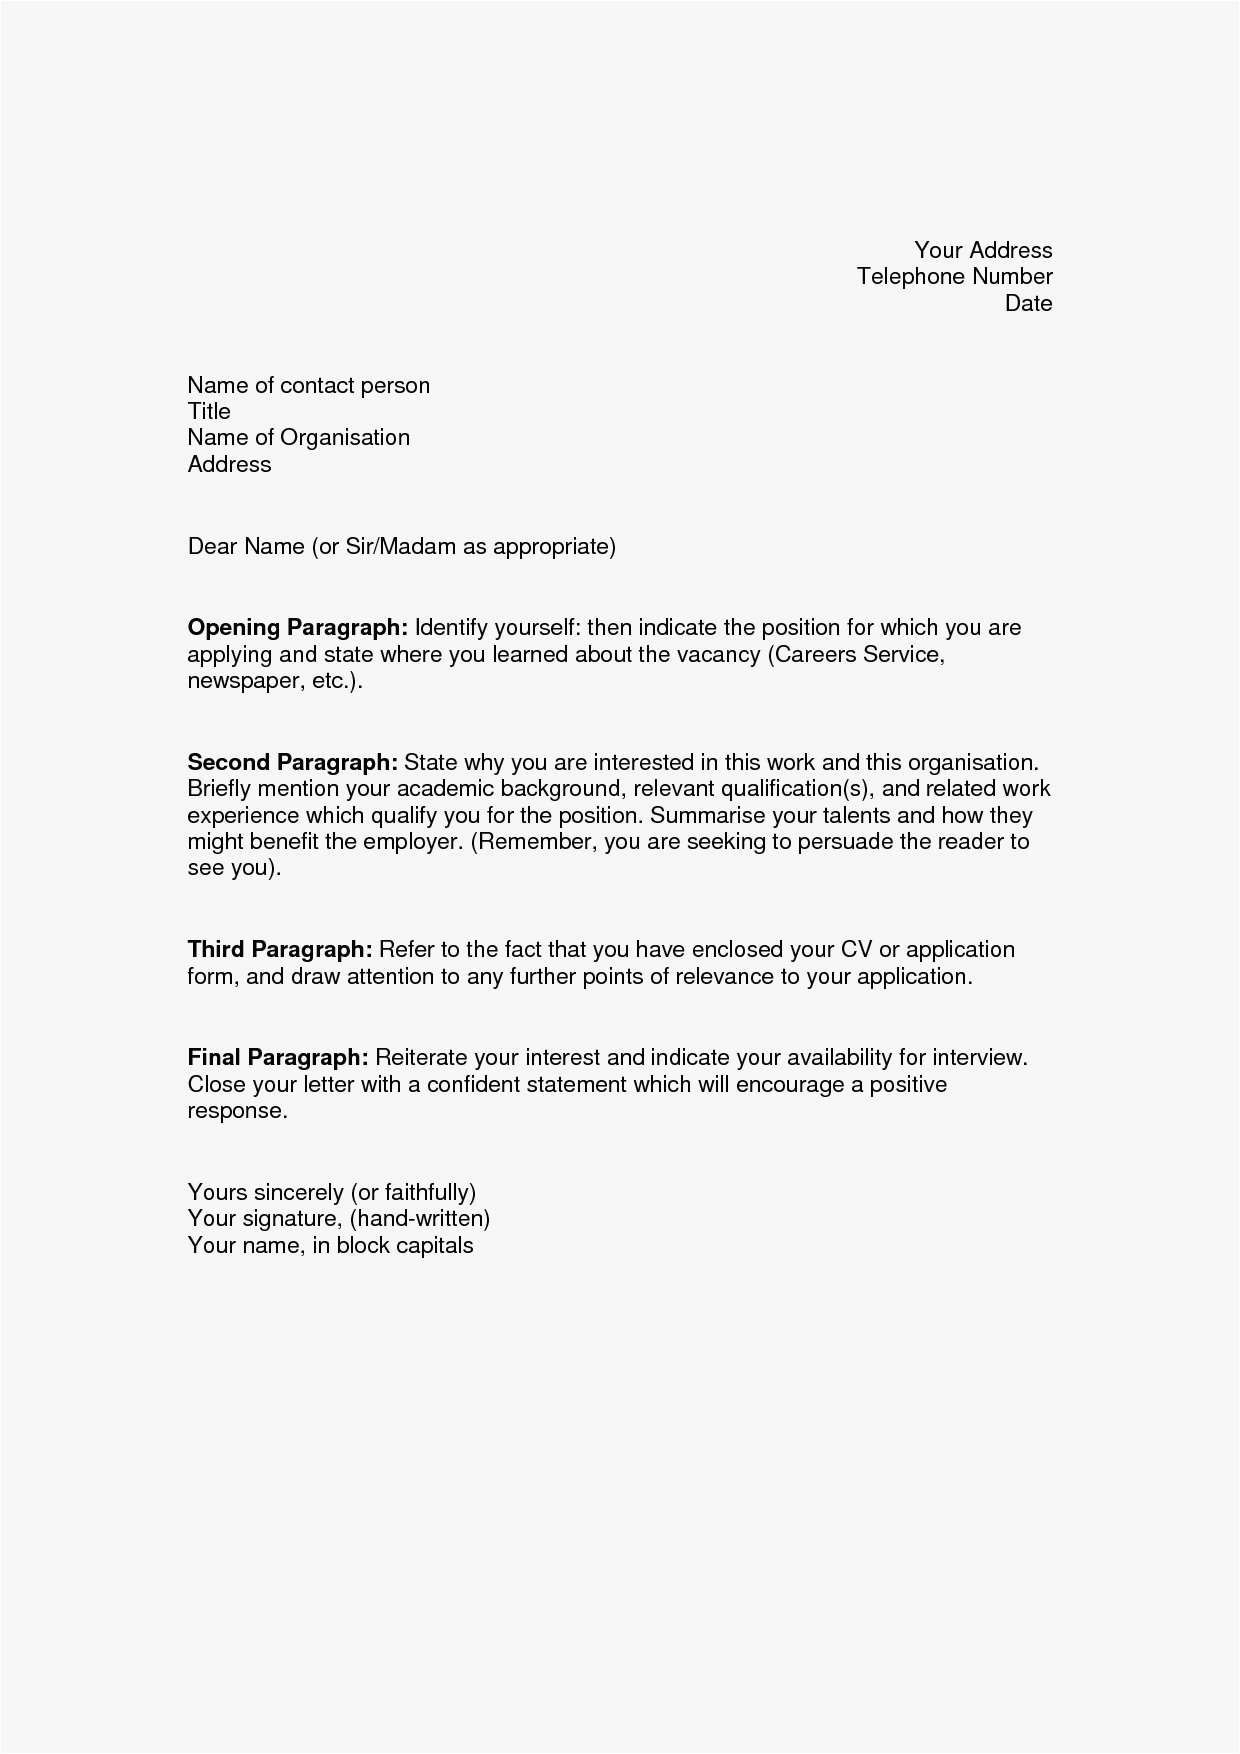 how to close a cv cover letter